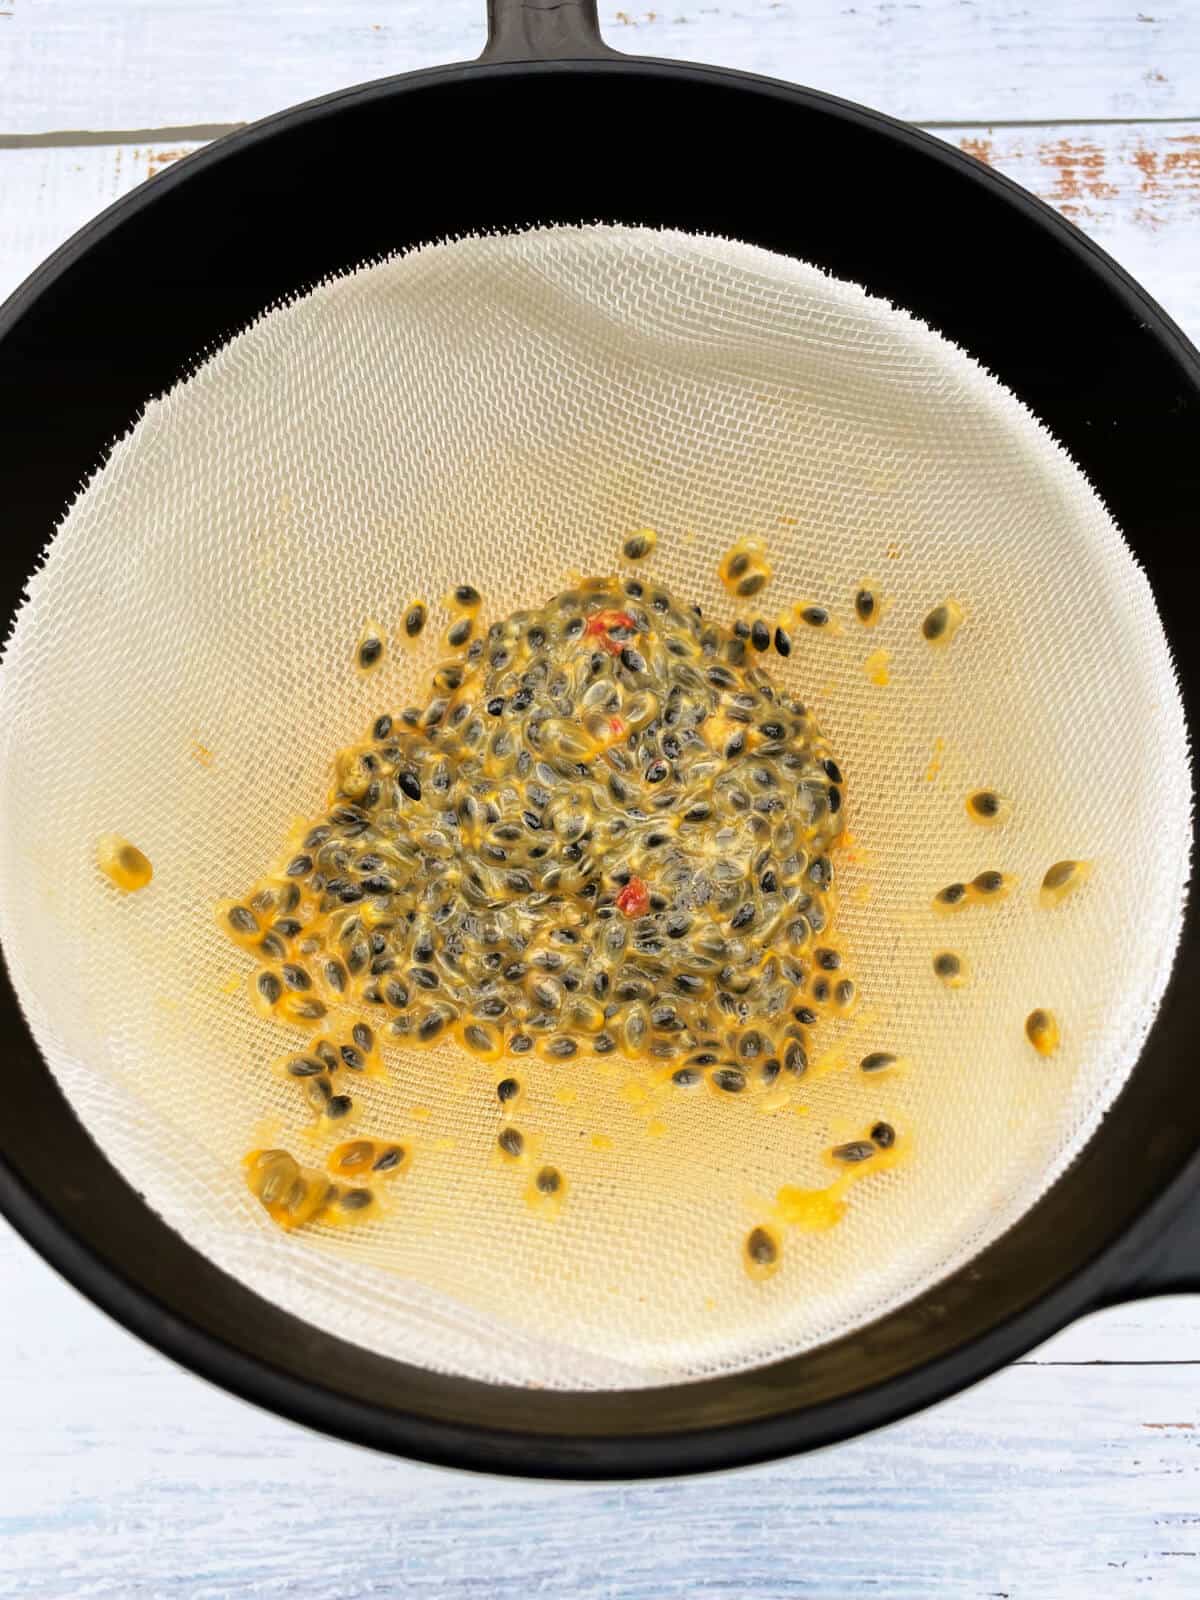 Sieve over a bowl containing passionfruit seeds.